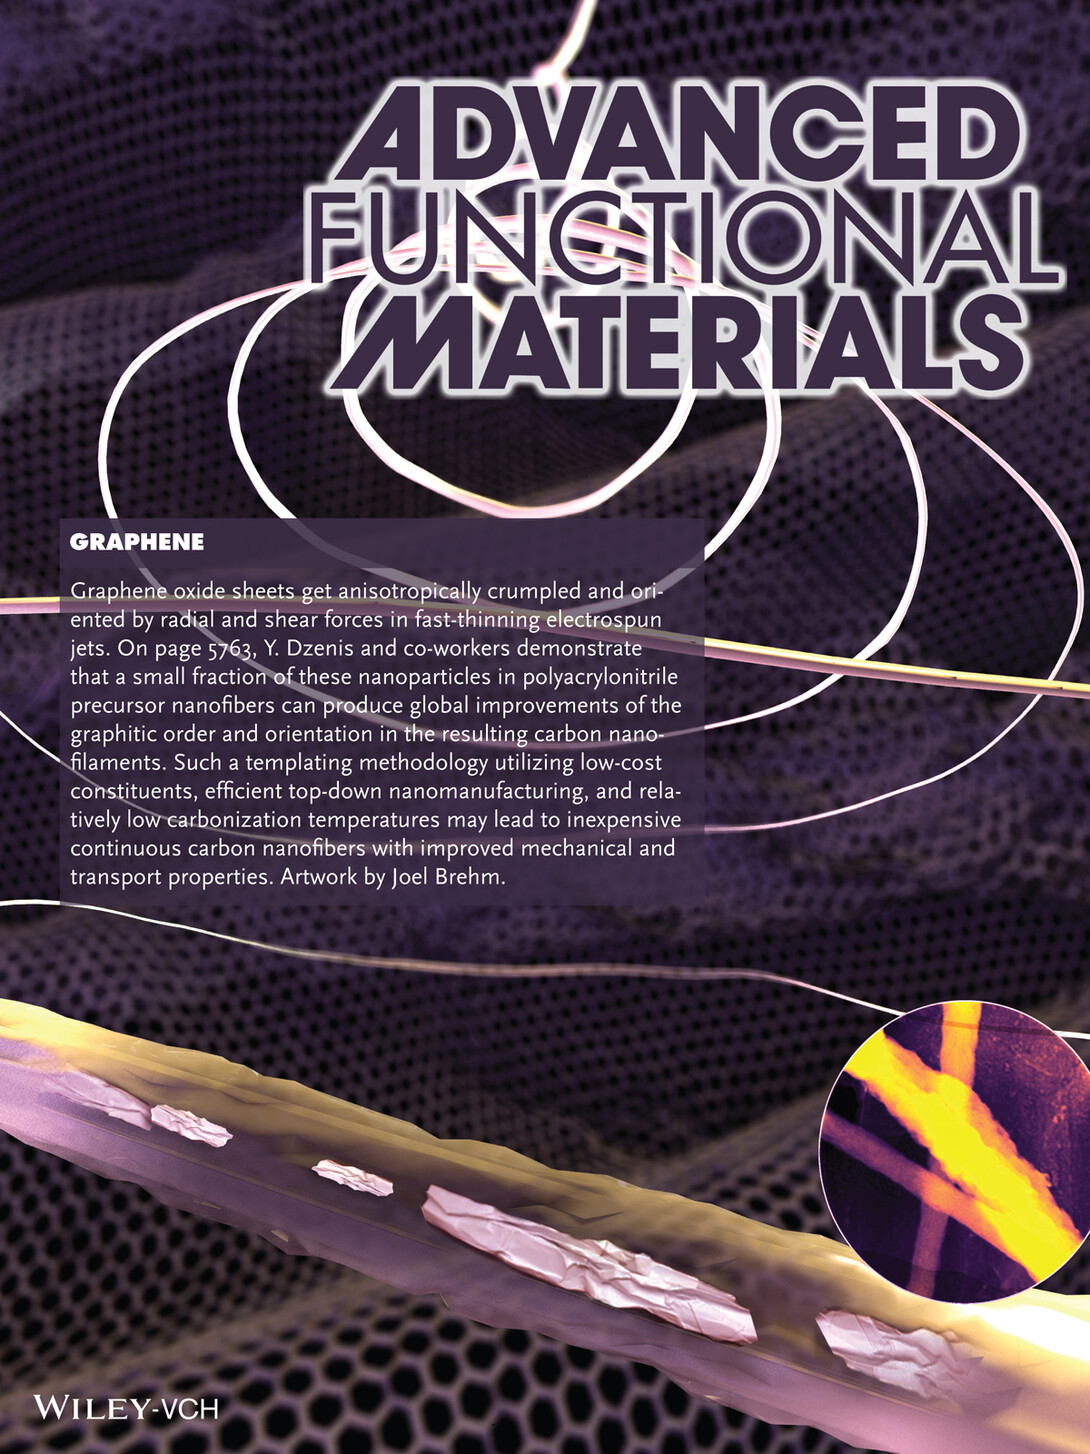 Page from the Dec. 10 issue of Advanced Functional Materials